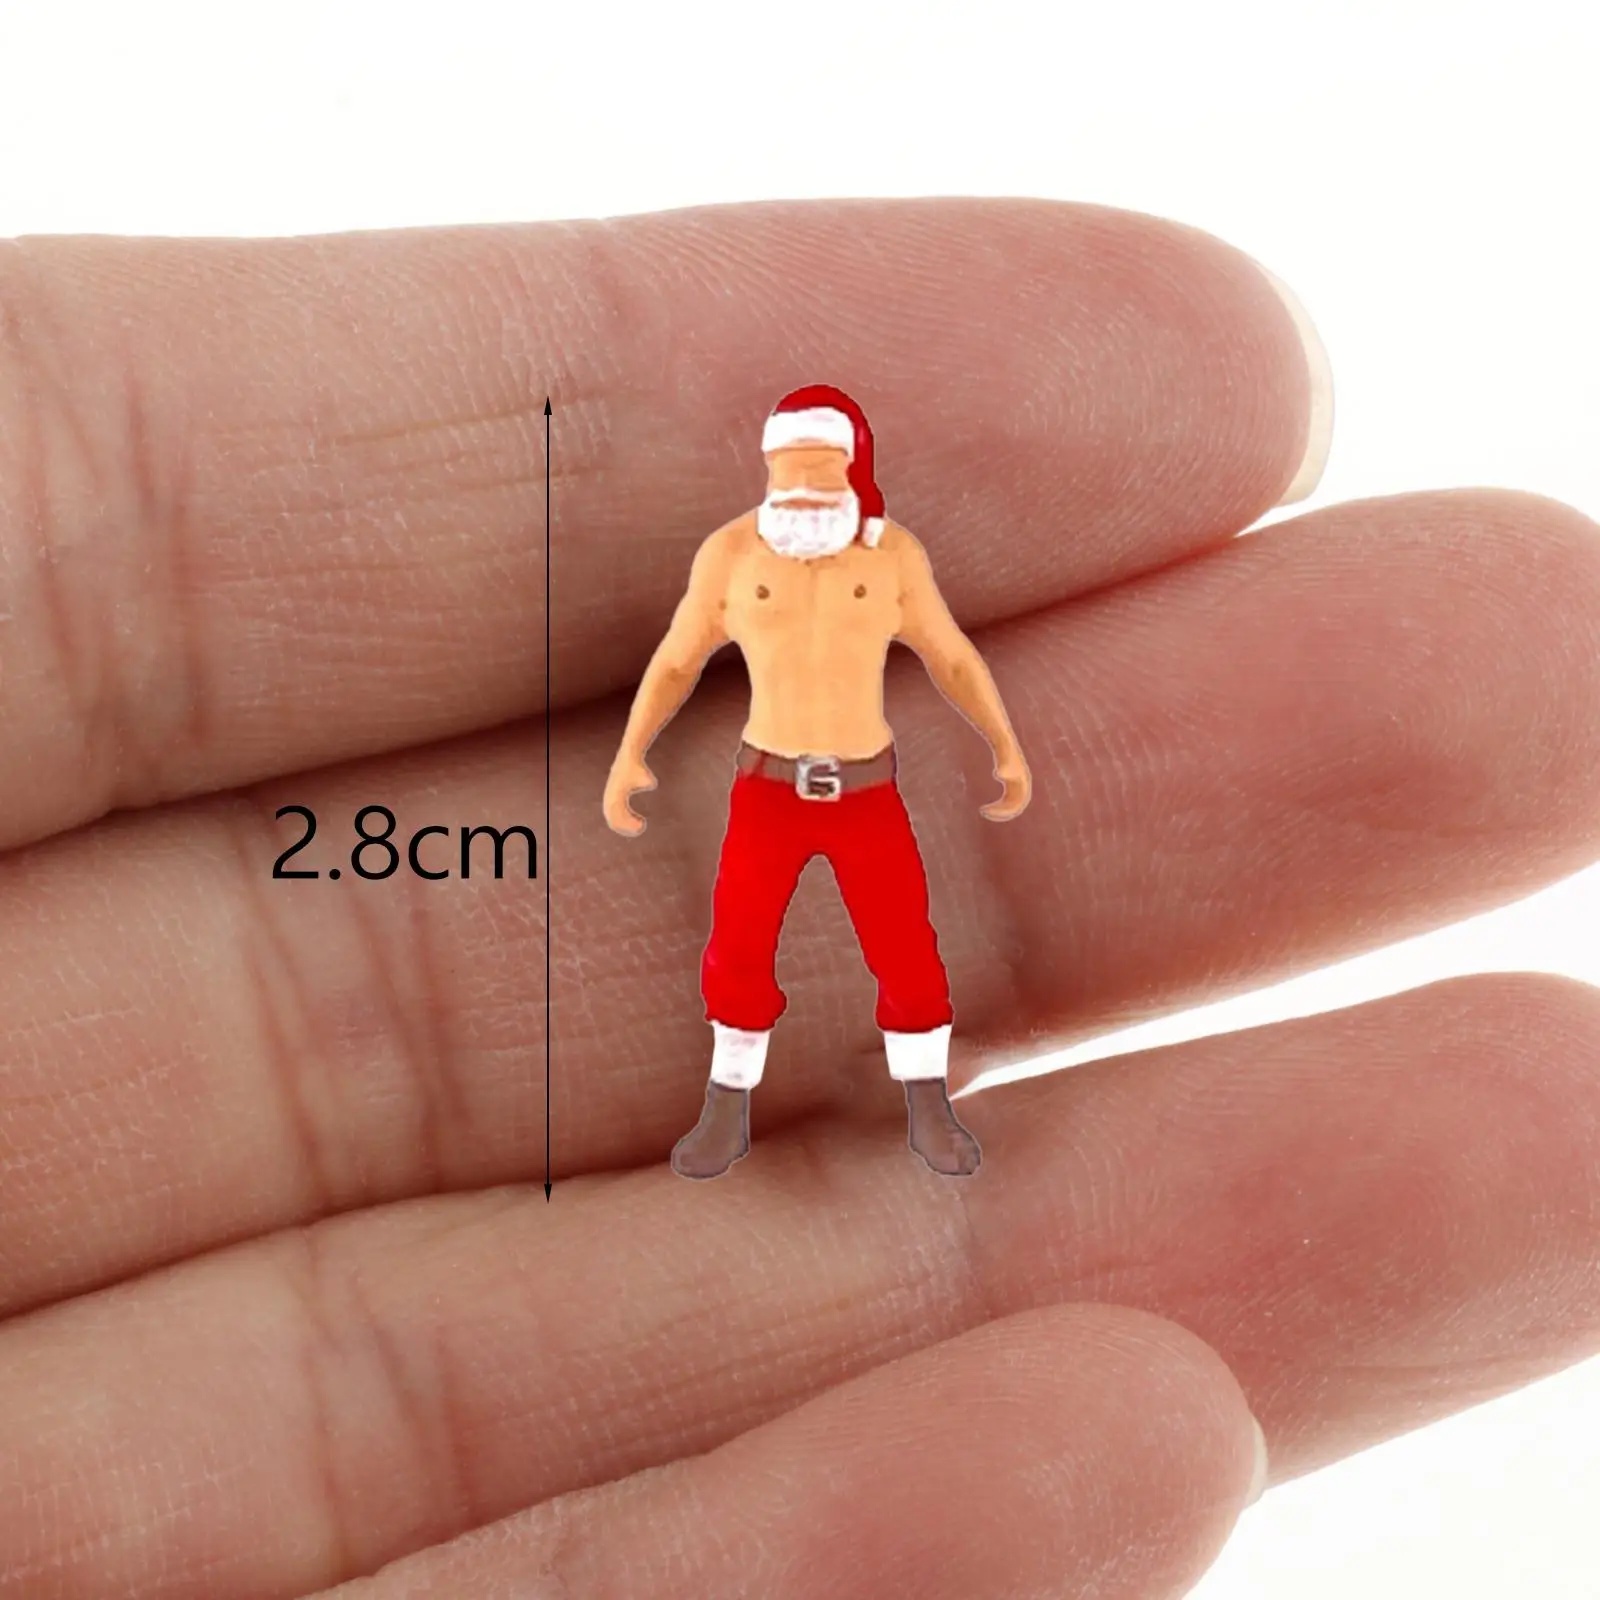 1/64 Diorama Christmas Scenes Figurines Miniature Figurines Santa Claus for Photography Props Dollhouse Scenery Landscape Layout